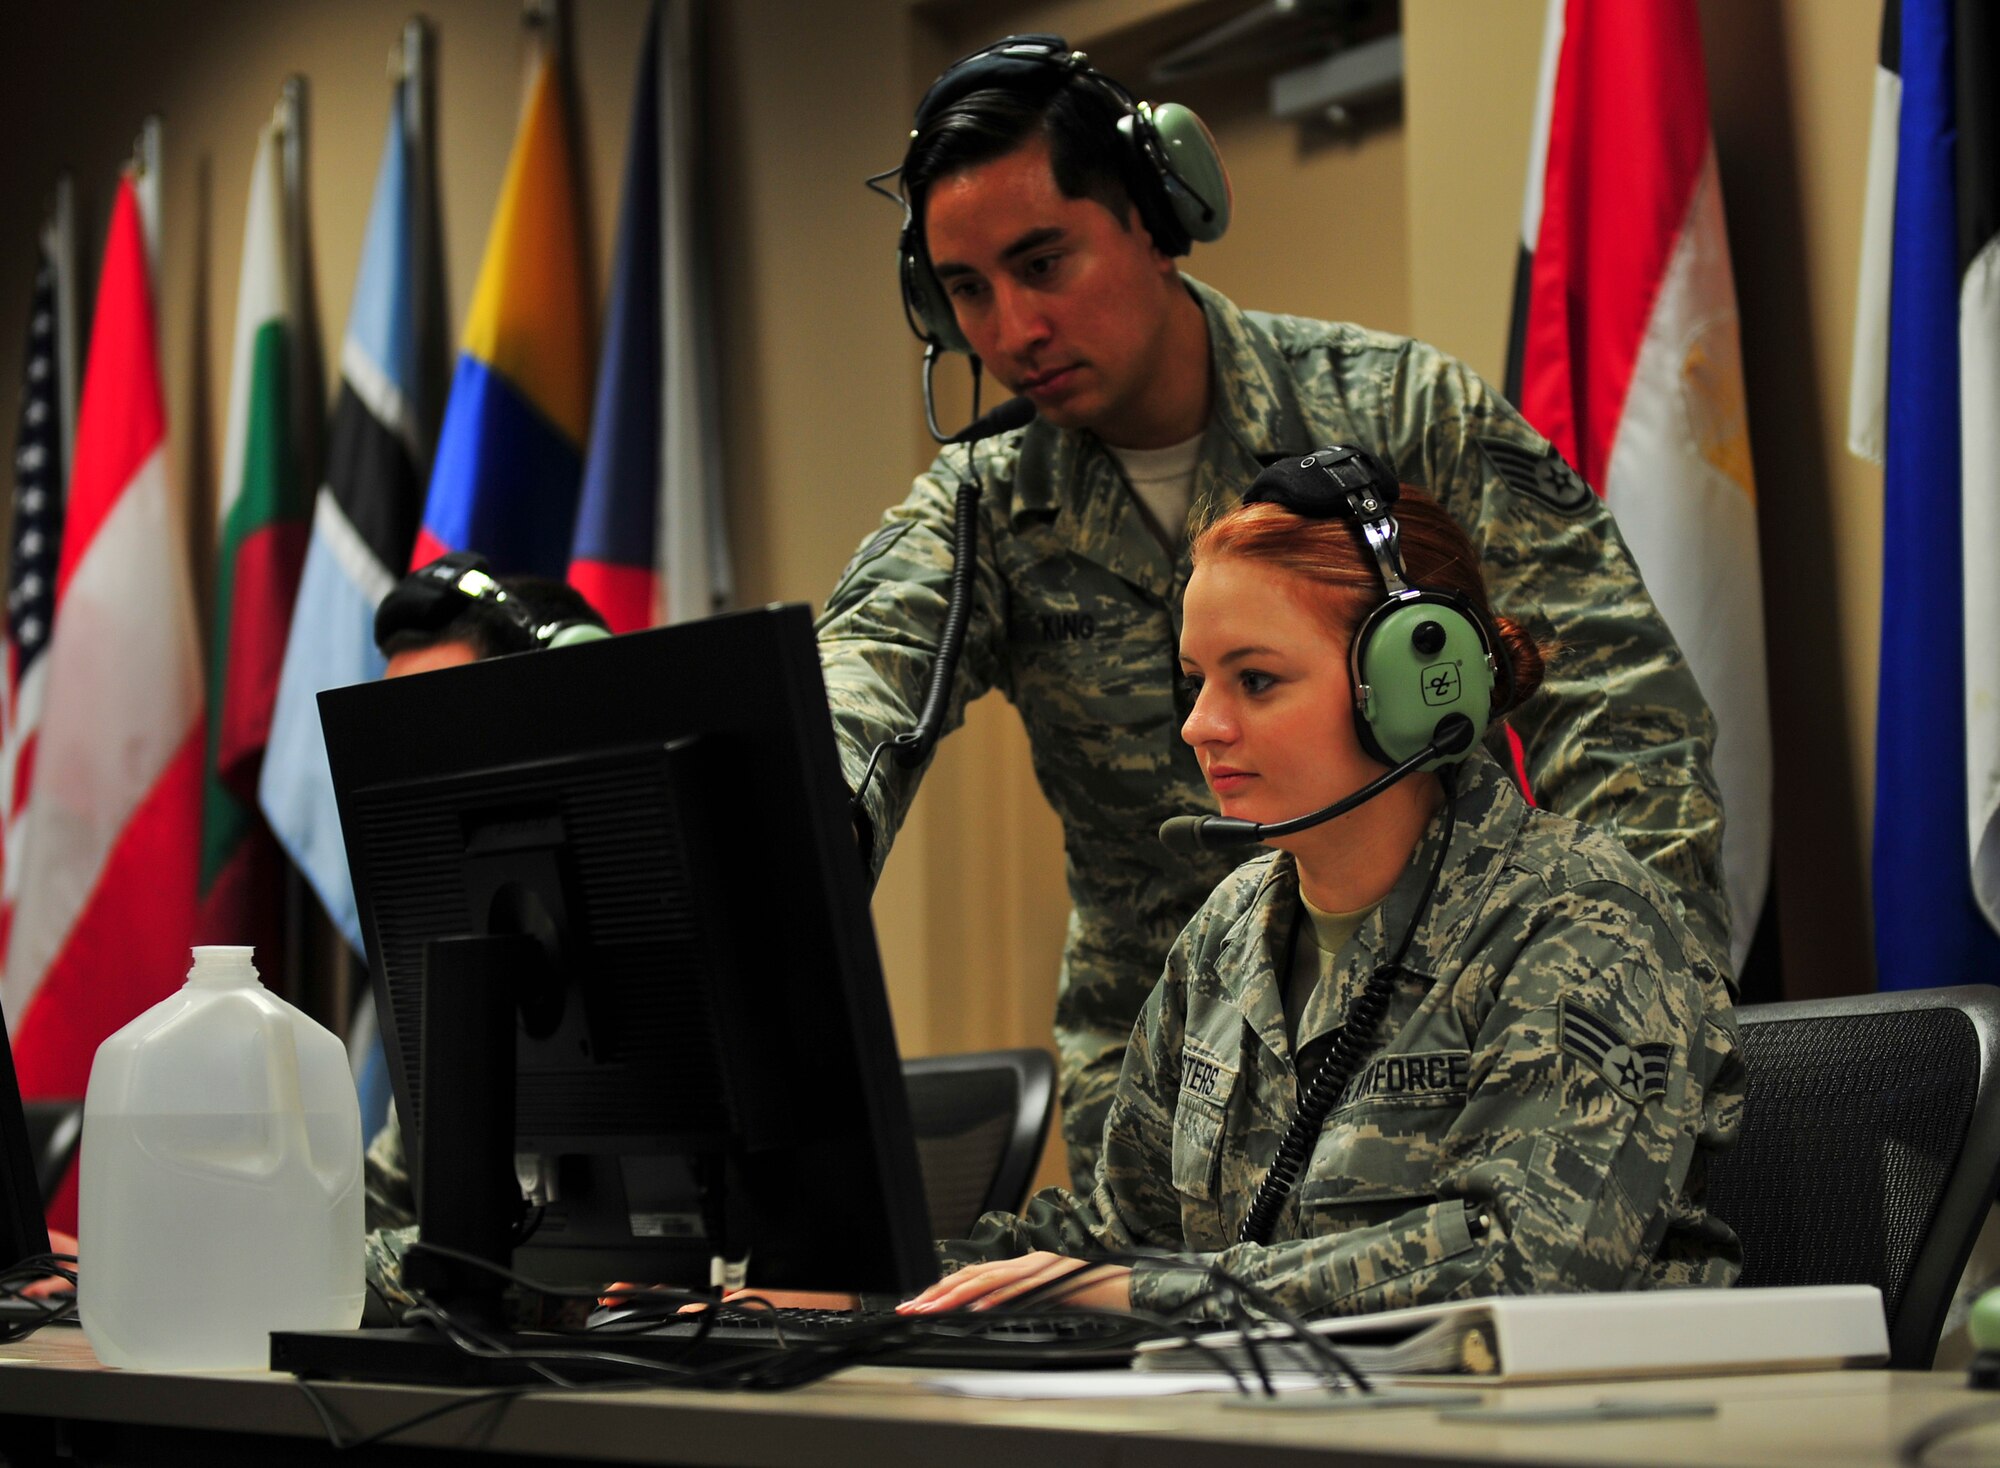 Senior Airman Amanda Masters, 337th Air Control Squadron weapons simulation technician, practices her skills while Staff Sgt. Steven King, 337th ACS pilot simulator, looks on at the 337th ACS building, Jan. 13. Masters was selected by her leadership to be the squadrons “Unsung Hero” for her dedication and excellence. (U.S. Air Force photo by Senior Airman Dustin Mullen/Released)